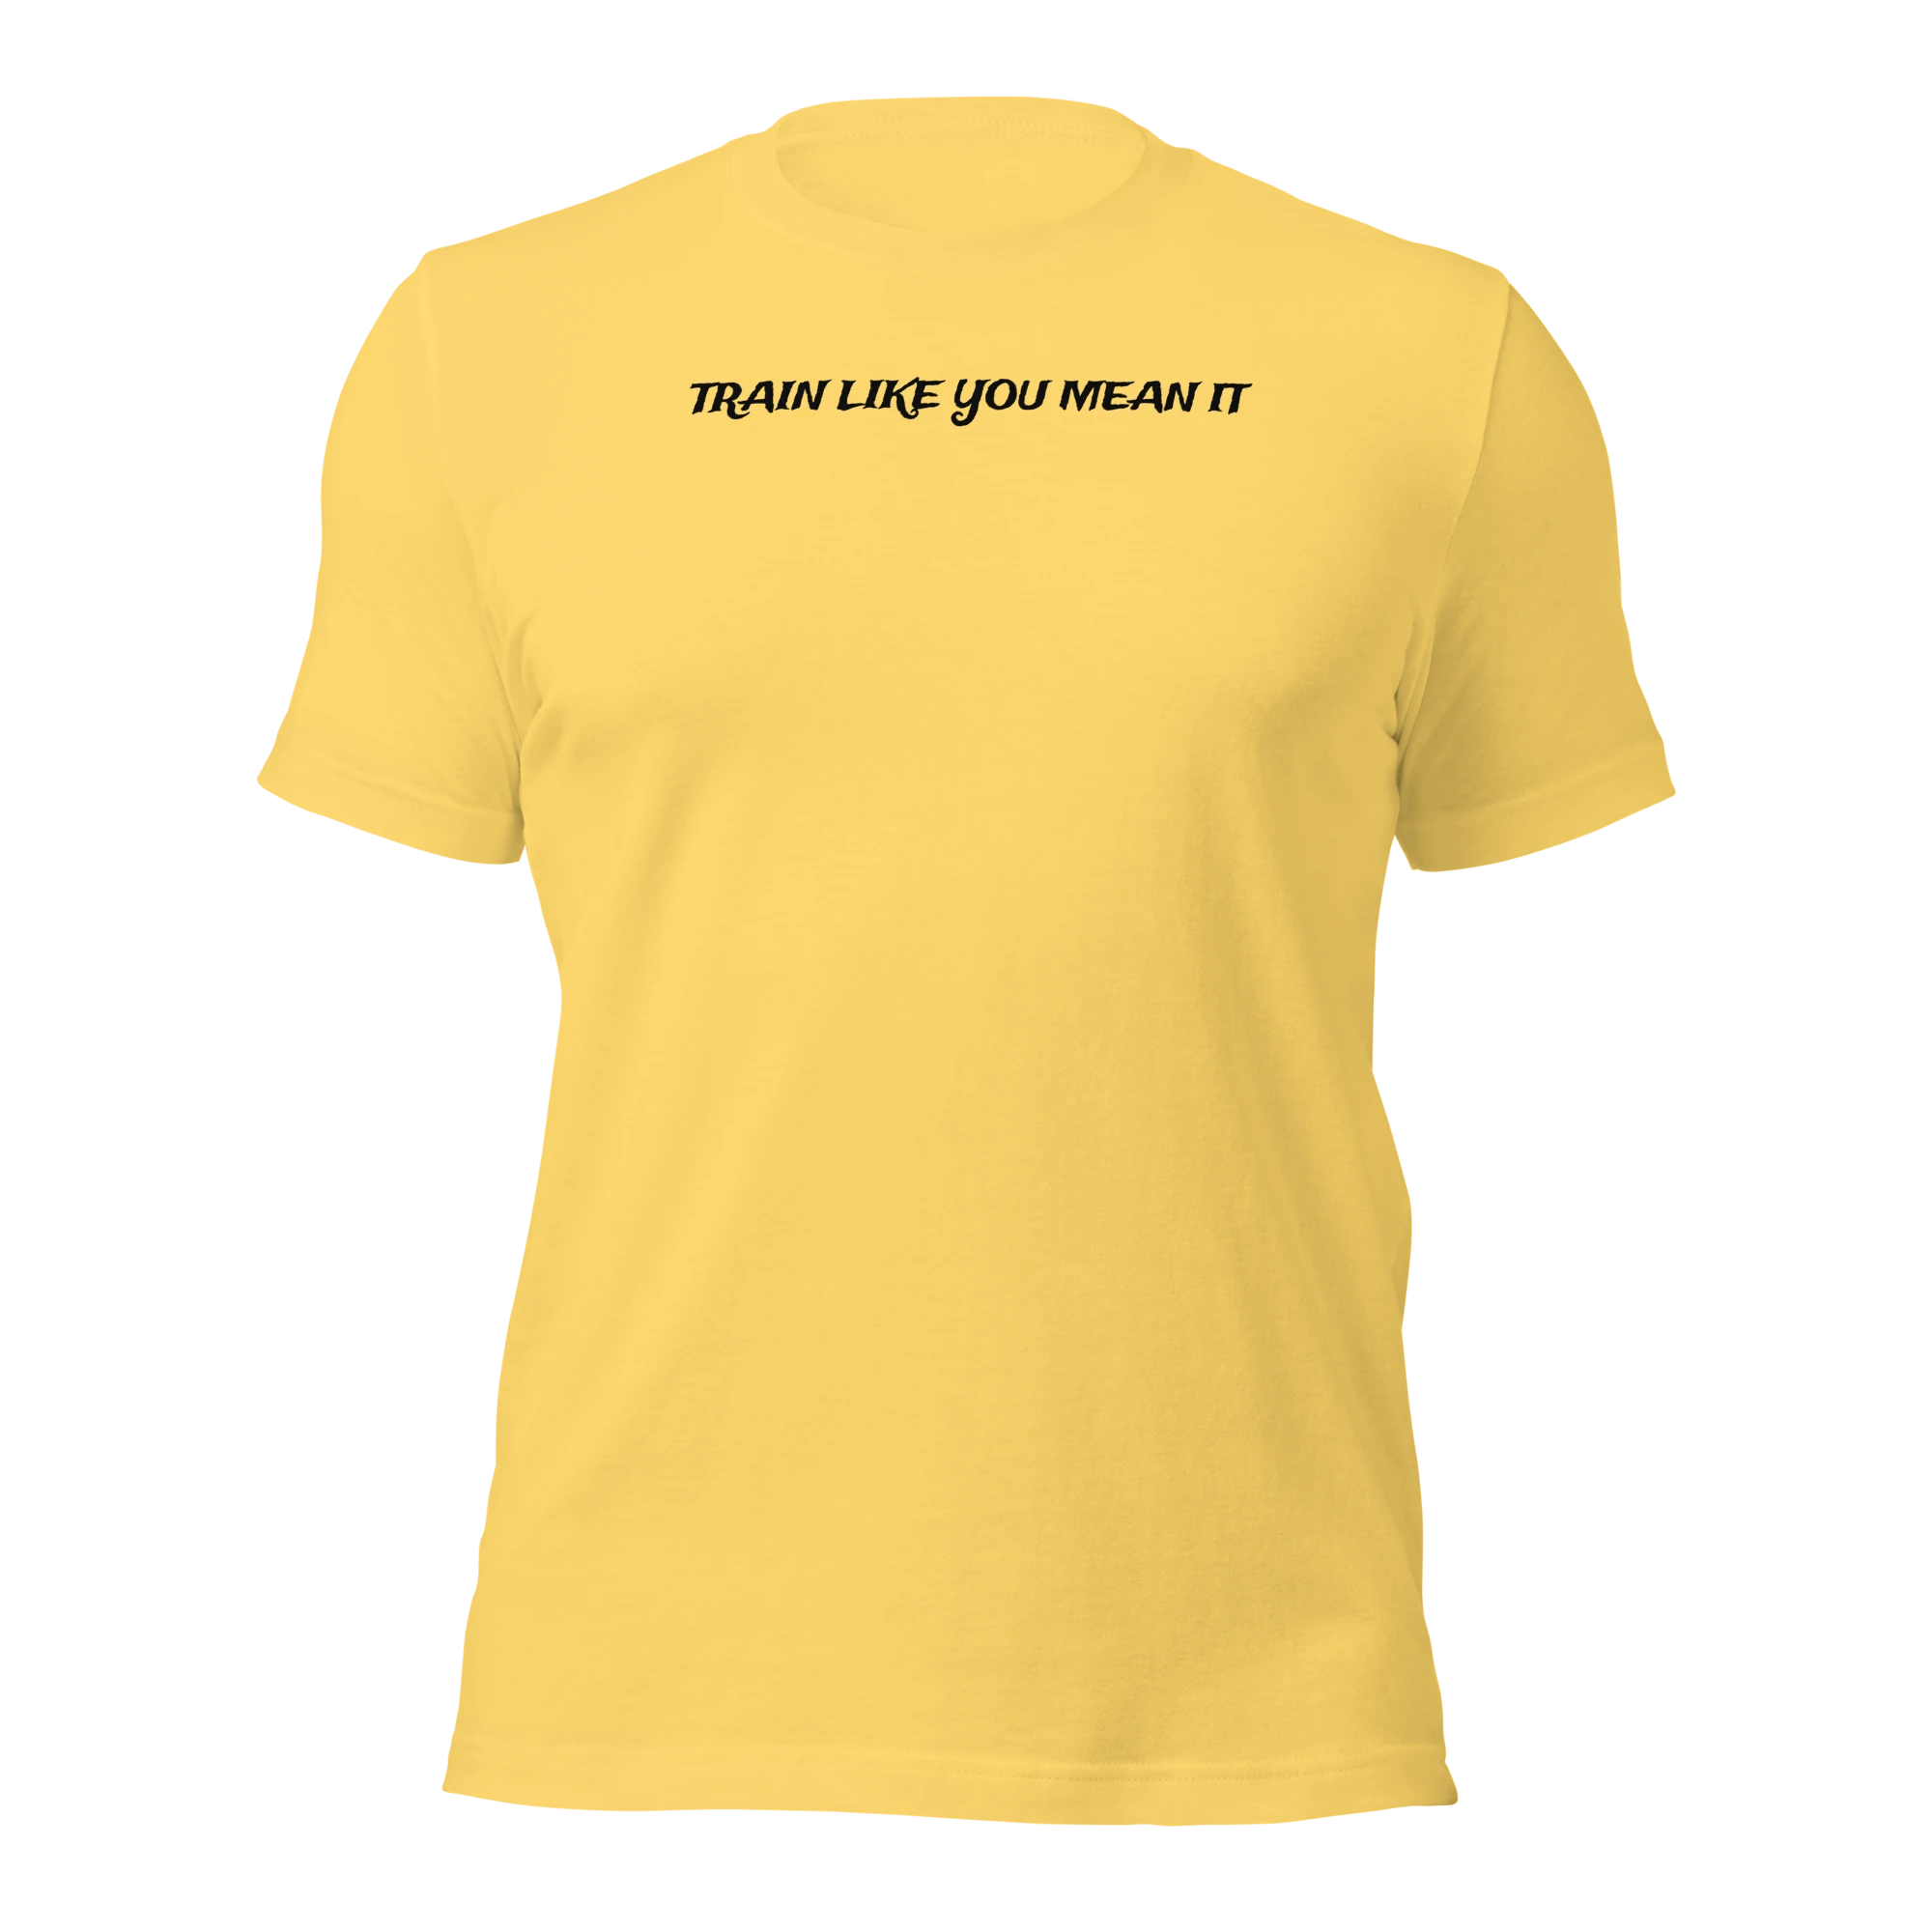 466-unisex-staple-t-shirt-yellow-front-6461948130902-16843598949307.png